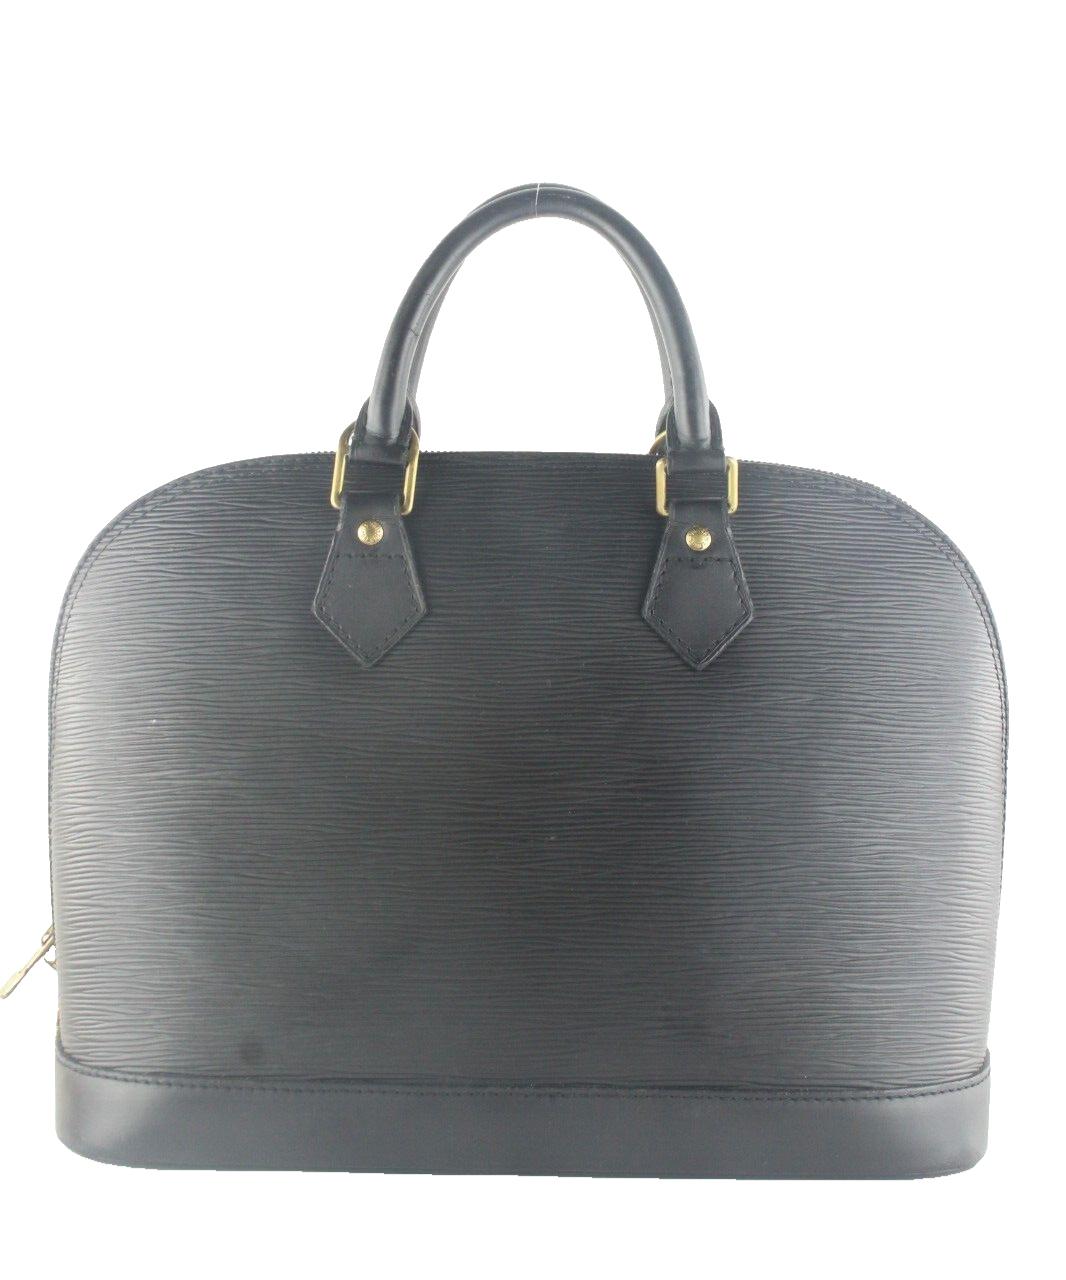 Louis Vuitton Black Epi Alma PM Leather Satchel Handbag 5LV1023K In Good Condition For Sale In Dix hills, NY